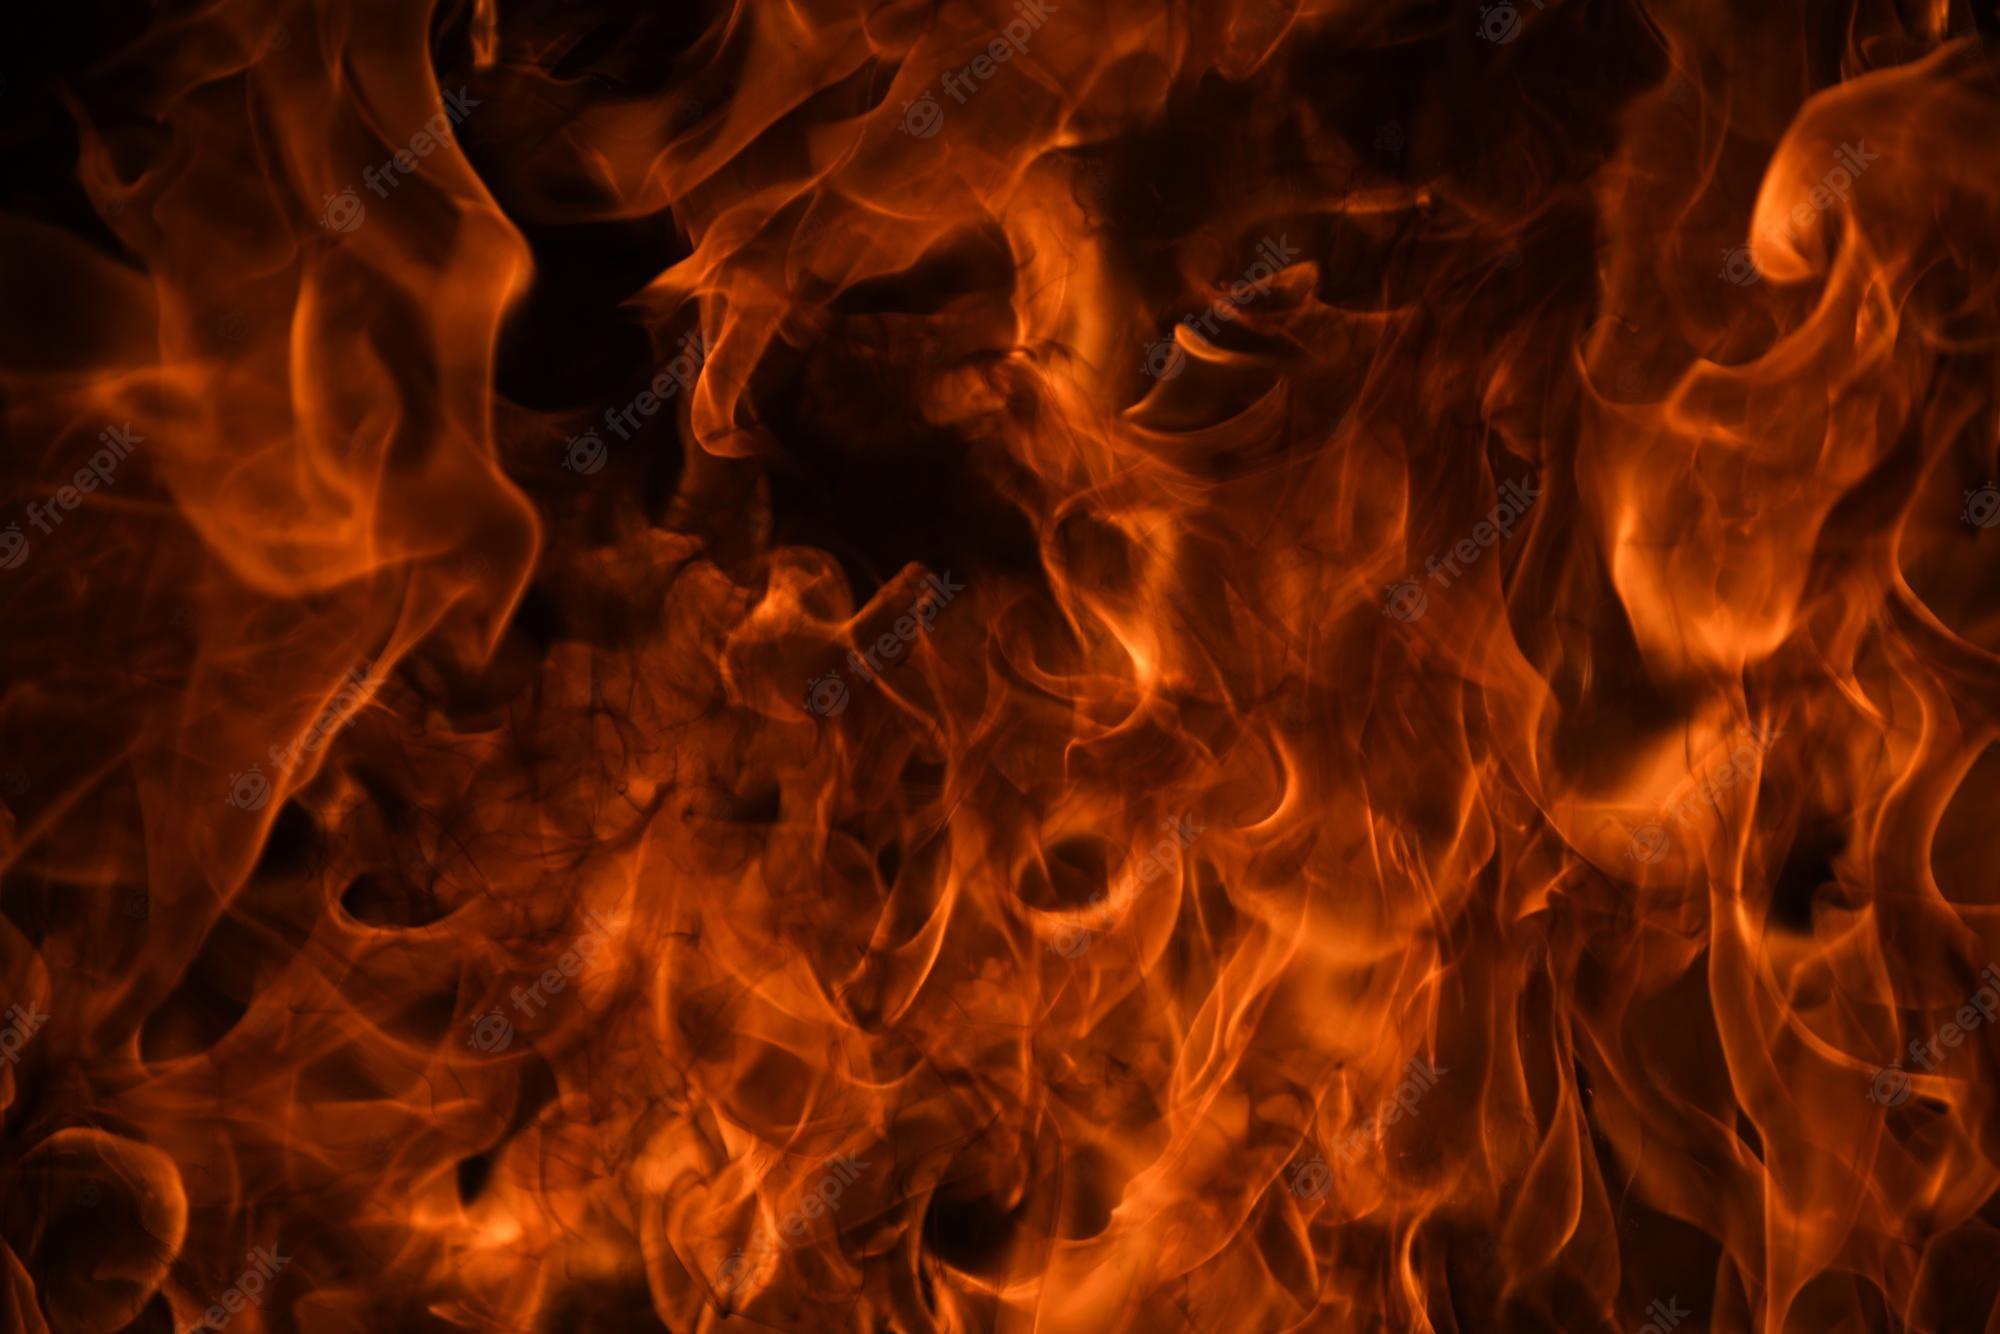 Fire Texture Wallpapers - Top Free Fire Texture Backgrounds ...